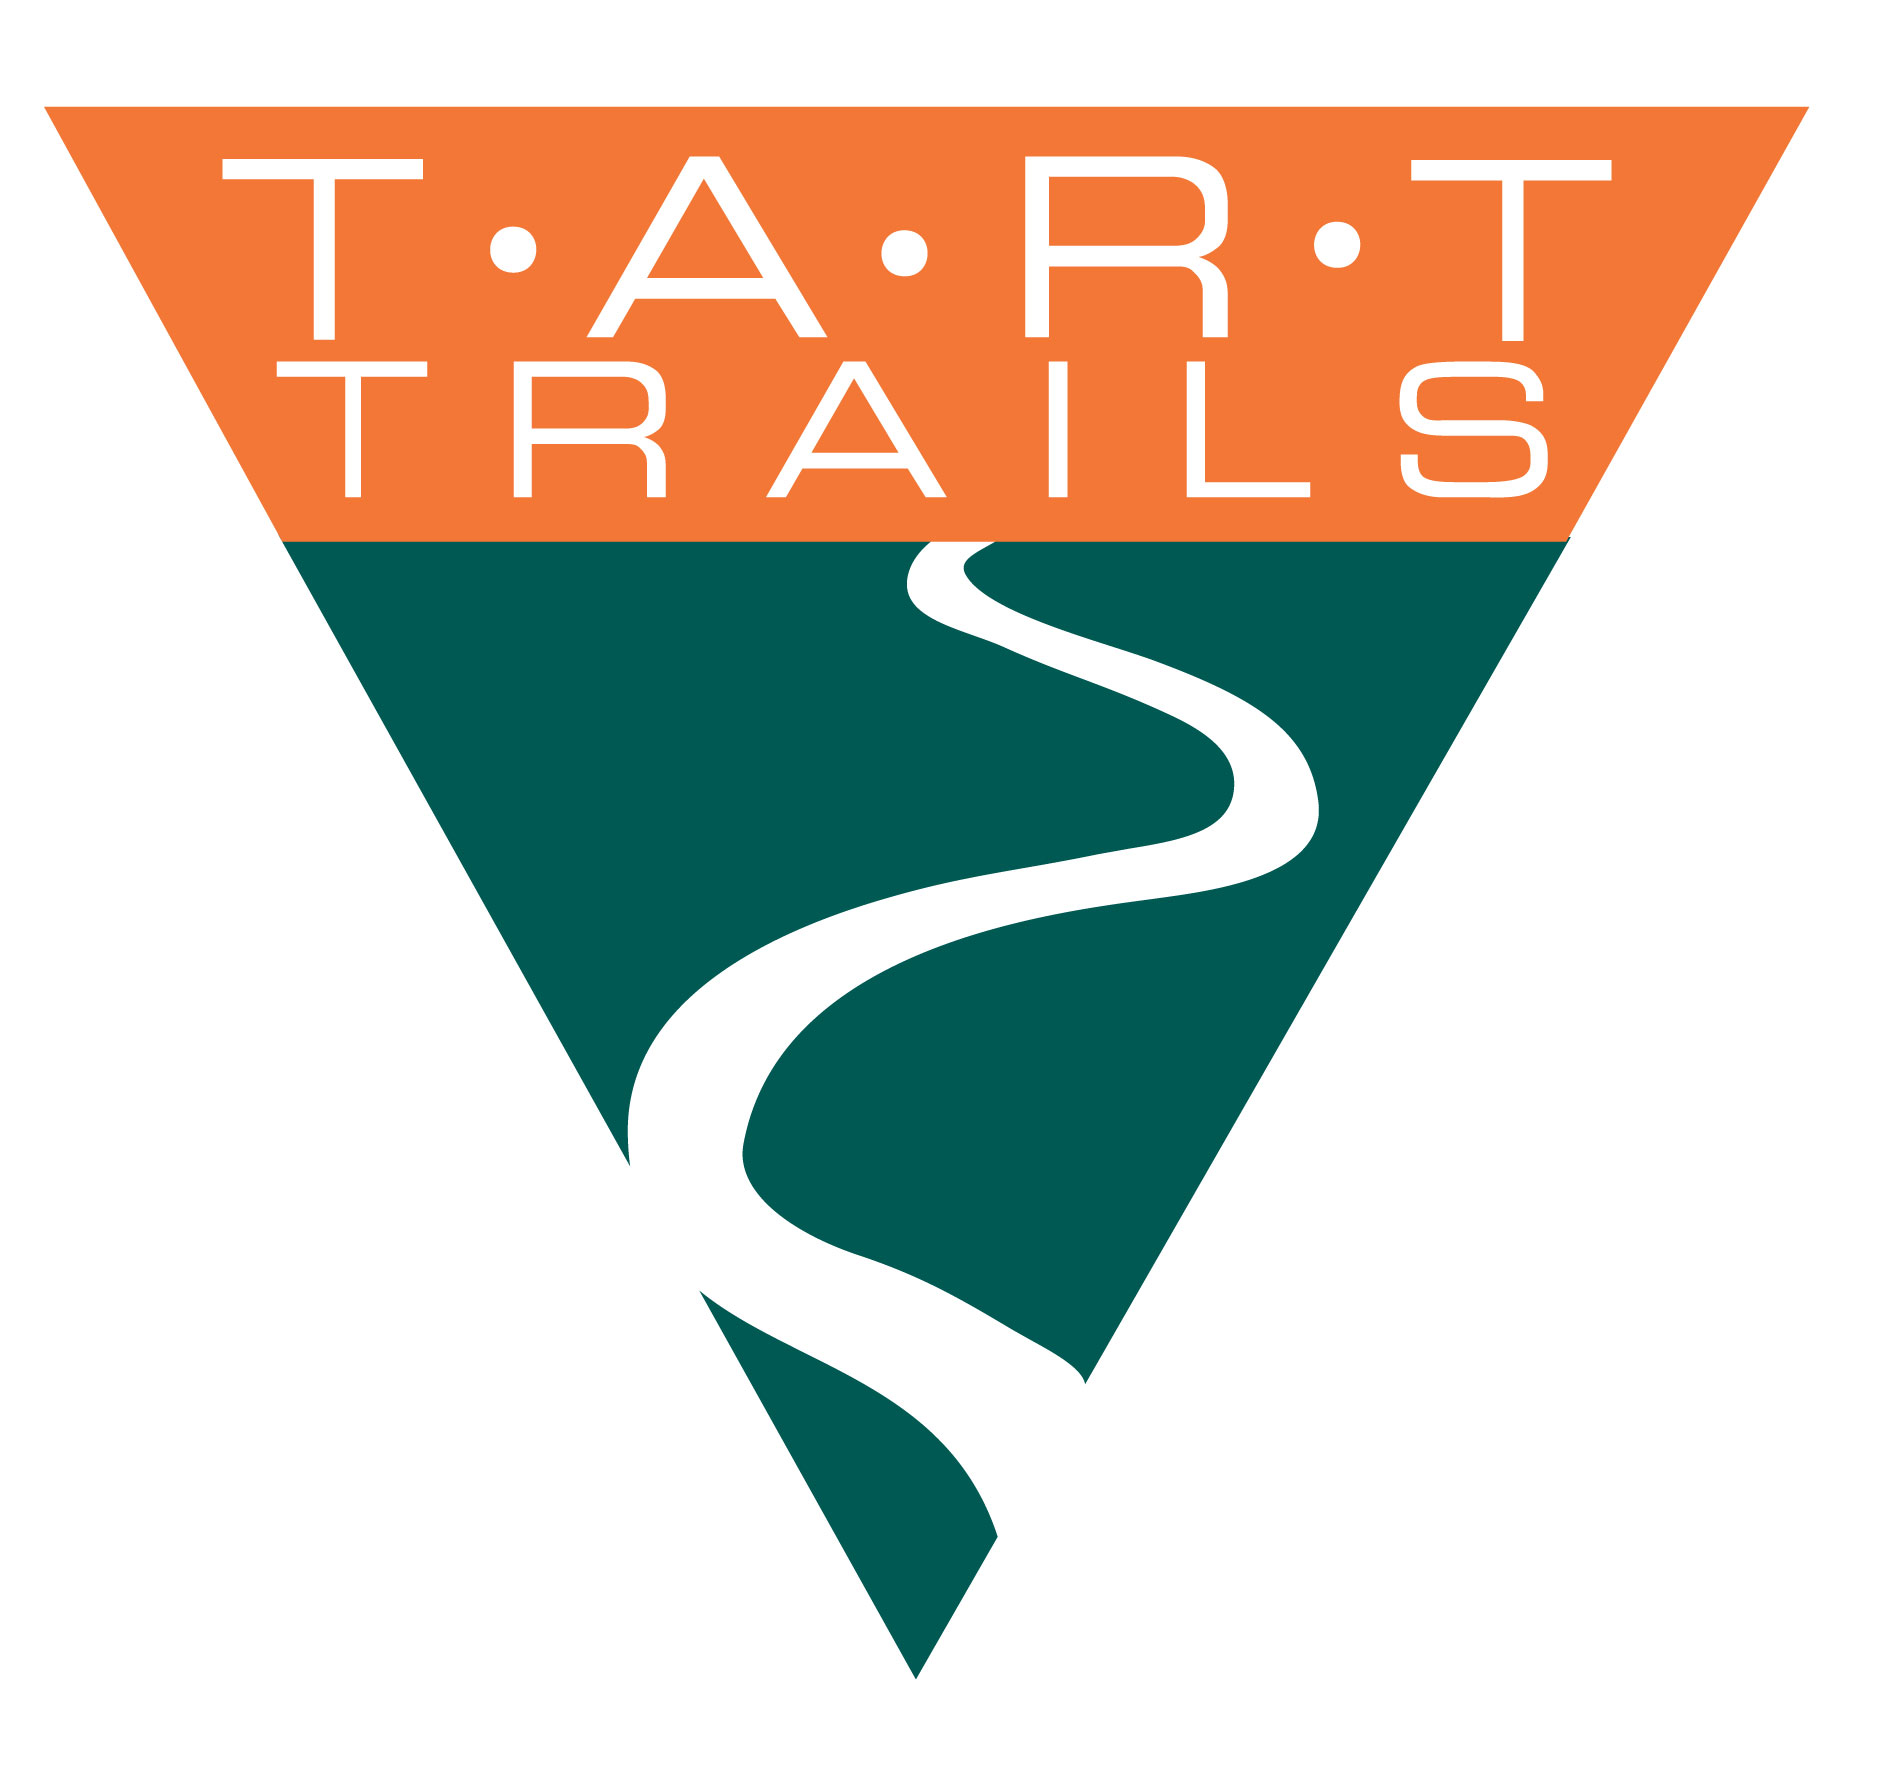 logo for TART Trails organization, consists of a triangle with the orange top half as a backdrop for the name of the org in white and a winding trail depicted in the green bottom half of the triangle